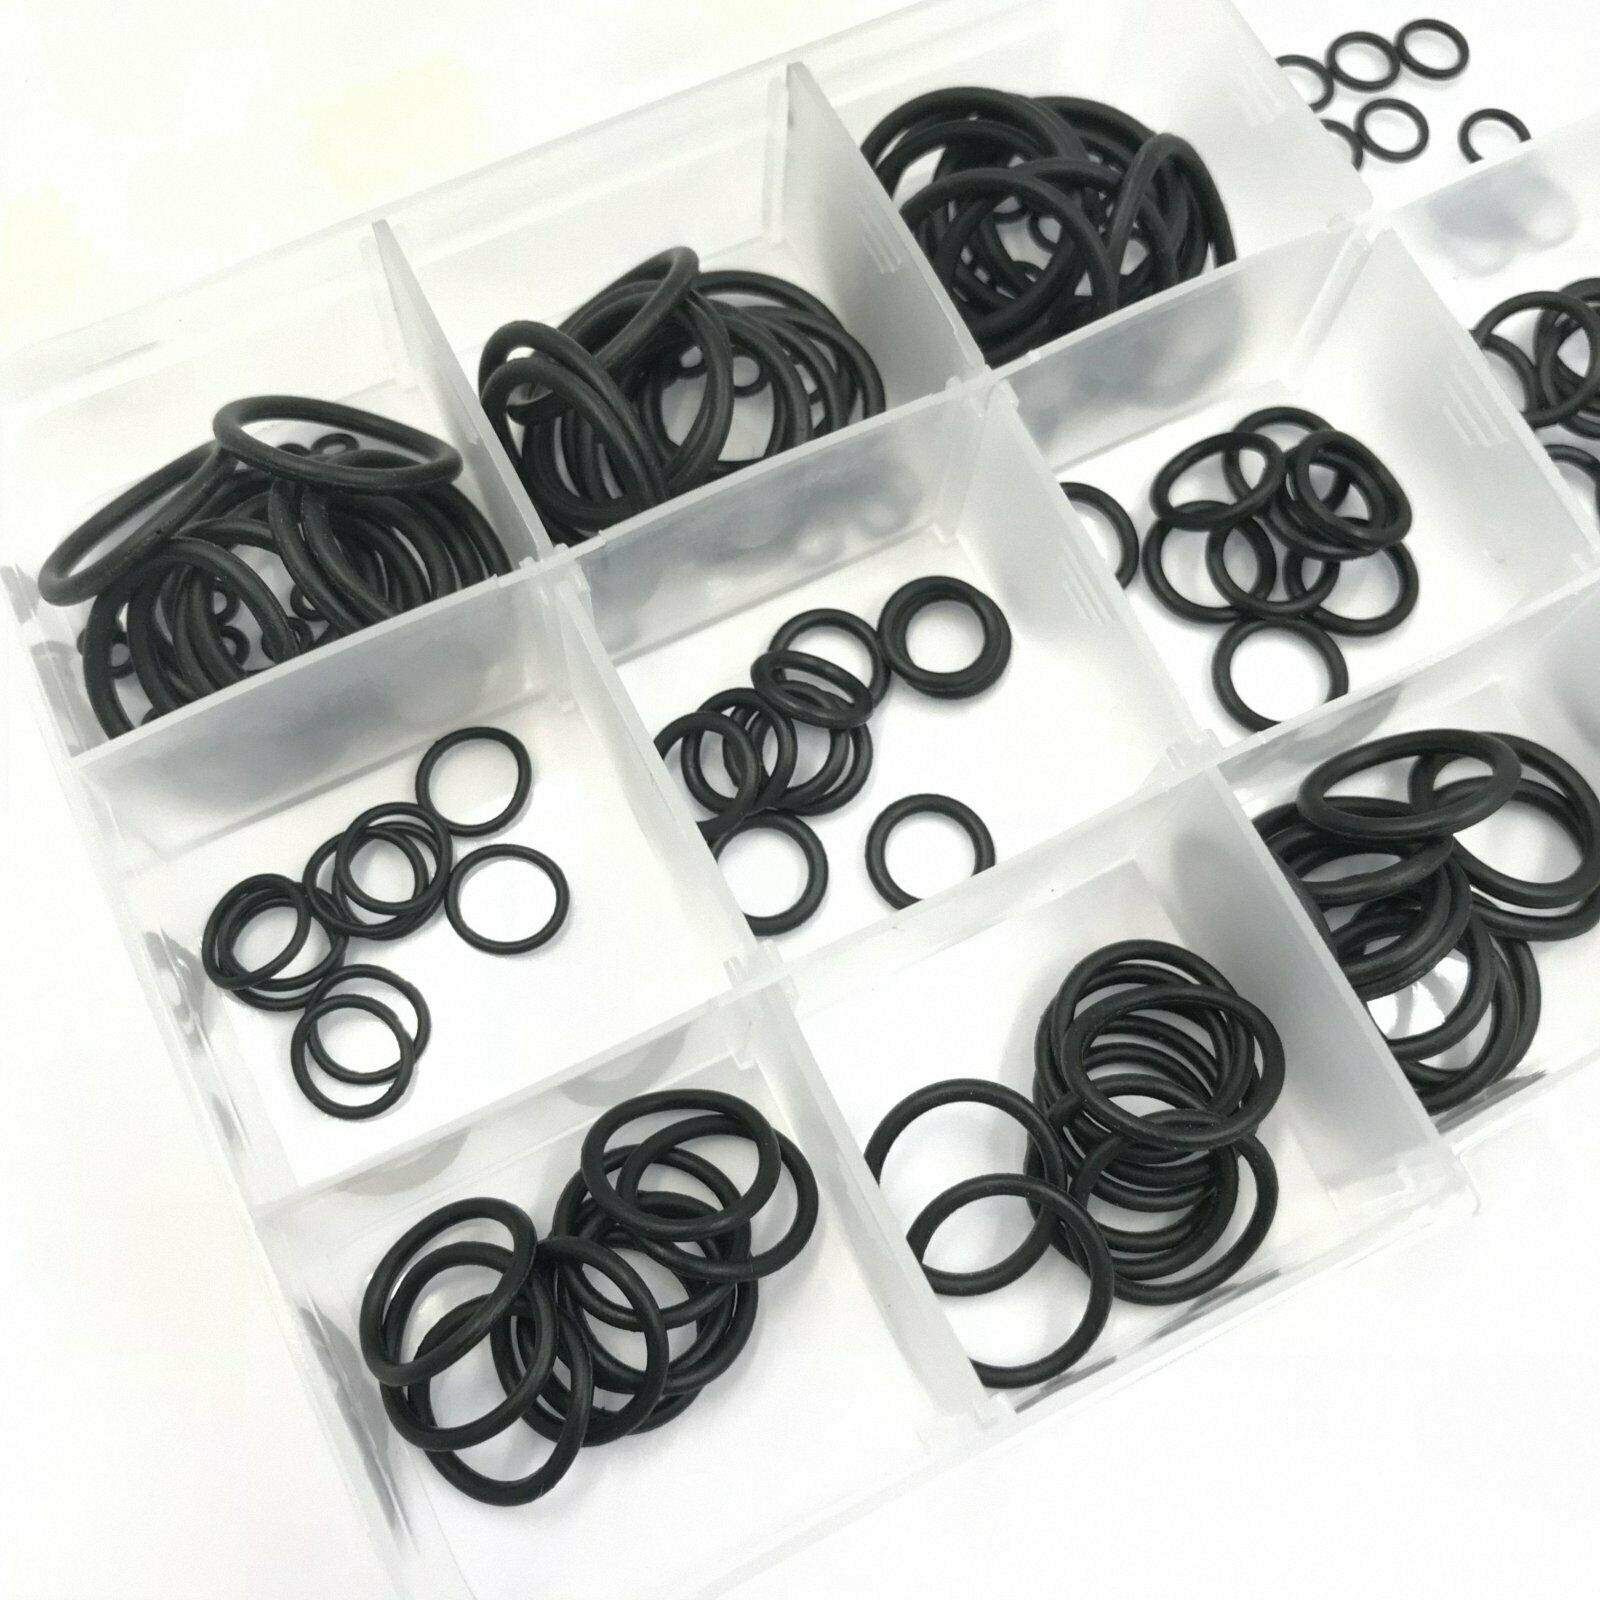 150Pcs from 6mm to 20mm Rubber 2mm 2.4mm 3.5mm Section OD O-Ring gaskets set